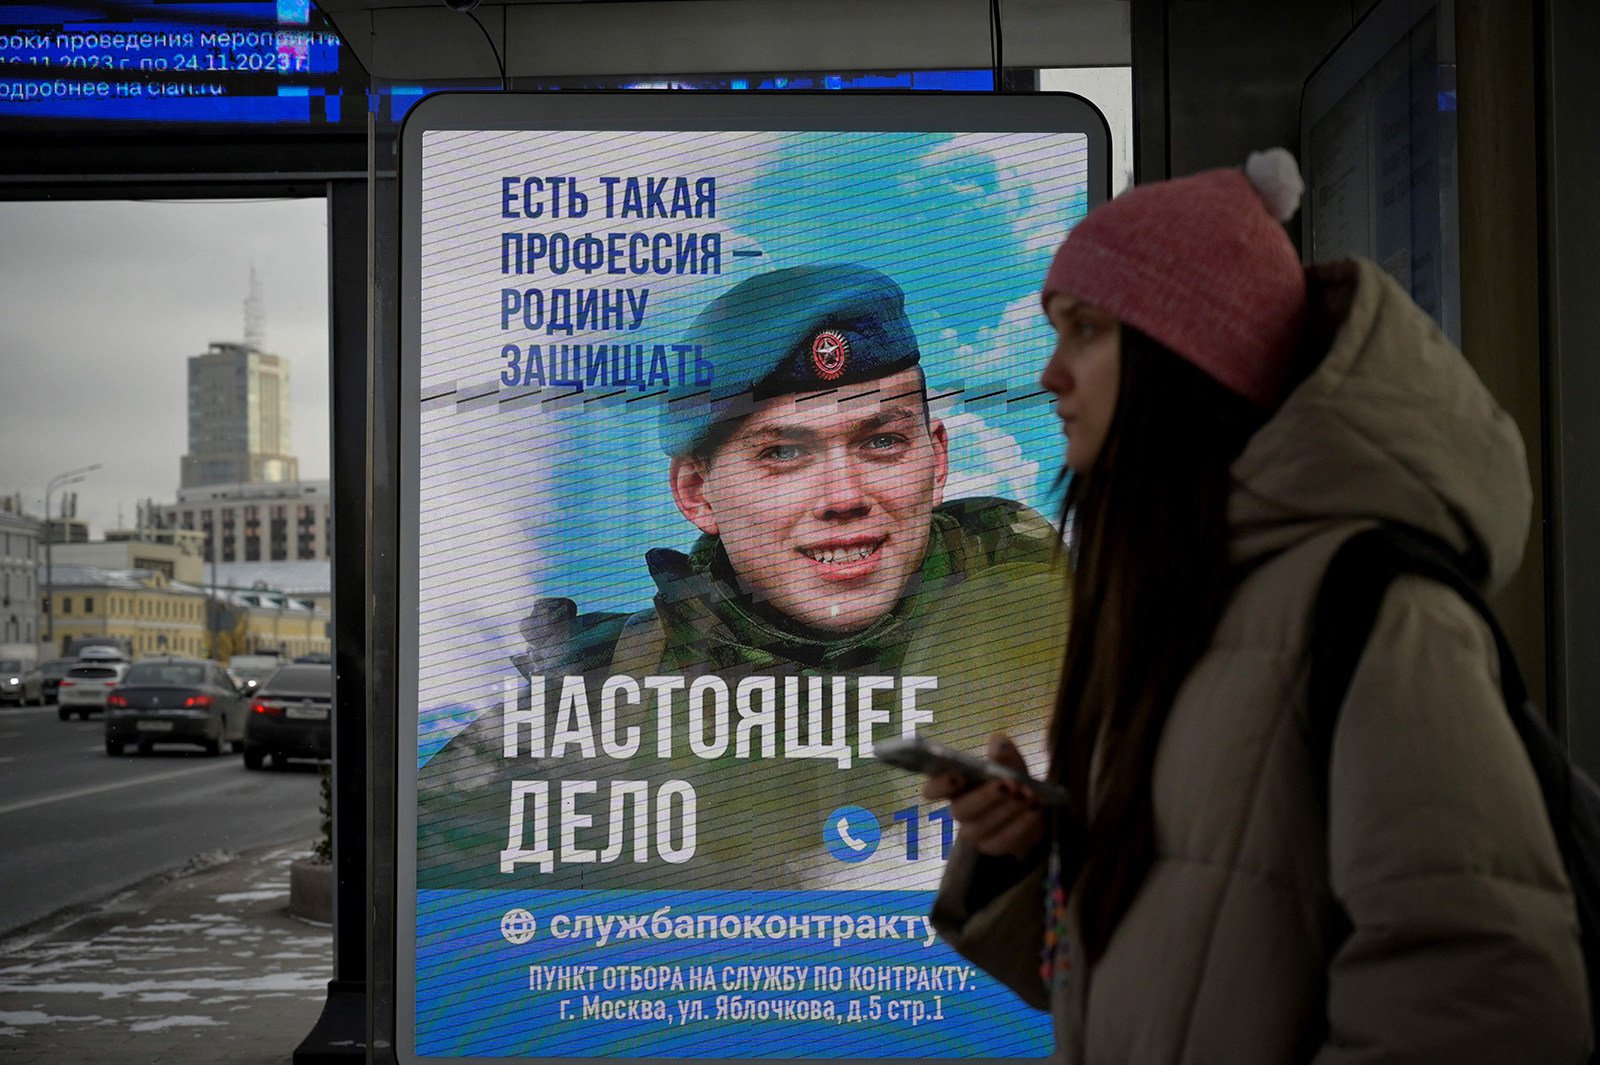 A woman waits at a Moscow bus stop with an advertising screen promoting contract military service in the Russian army. Photo: AFP via Getty Images / TNS